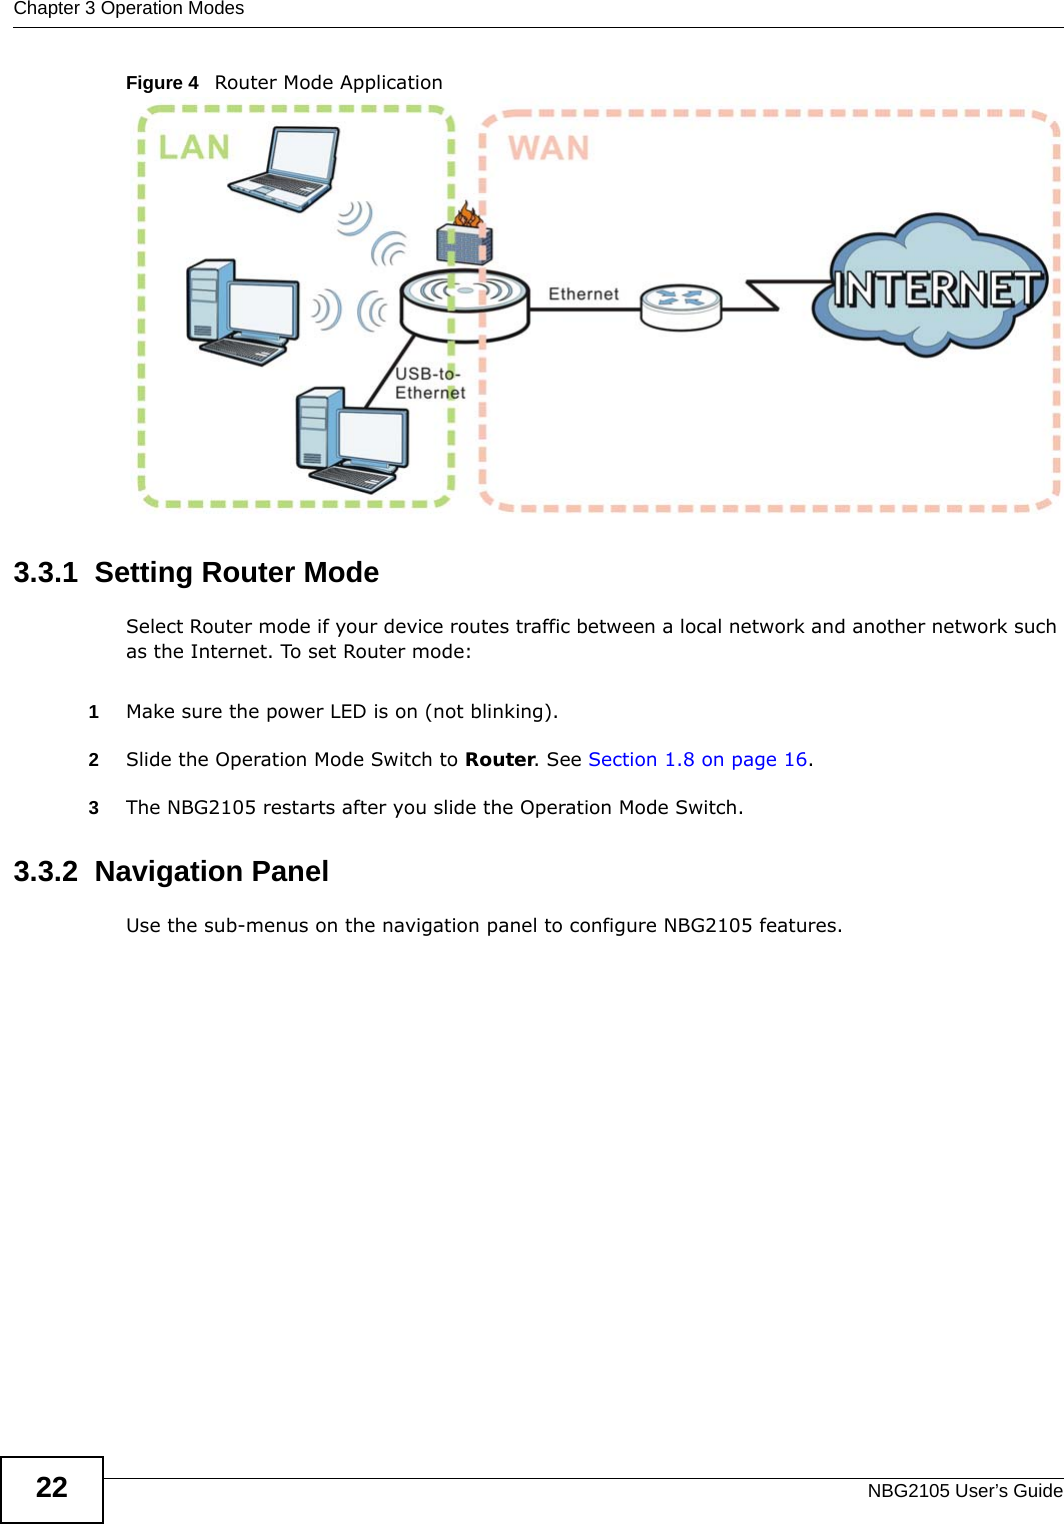 Chapter 3 Operation ModesNBG2105 User’s Guide22Figure 4   Router Mode Application3.3.1  Setting Router ModeSelect Router mode if your device routes traffic between a local network and another network such as the Internet. To set Router mode:1Make sure the power LED is on (not blinking).2Slide the Operation Mode Switch to Router. See Section 1.8 on page 16. 3The NBG2105 restarts after you slide the Operation Mode Switch.3.3.2  Navigation PanelUse the sub-menus on the navigation panel to configure NBG2105 features. 